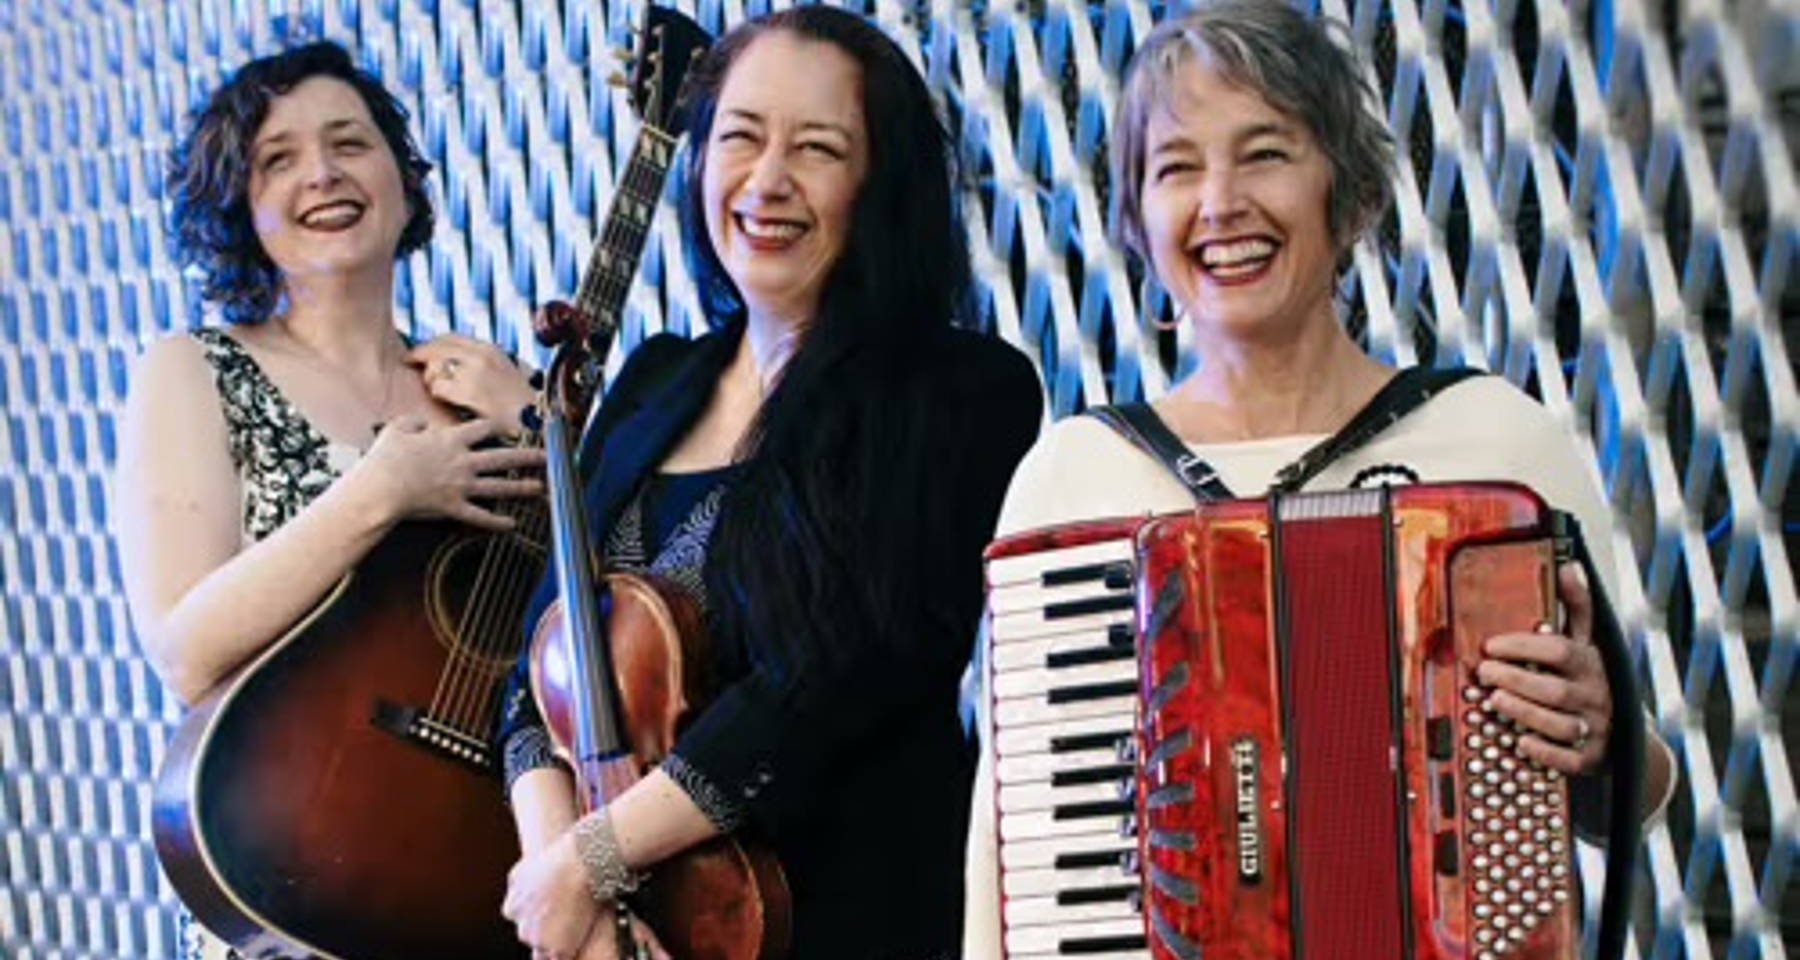 True Life Trio performs Global vocal, accordion and strings harmonies from Europe and the American South